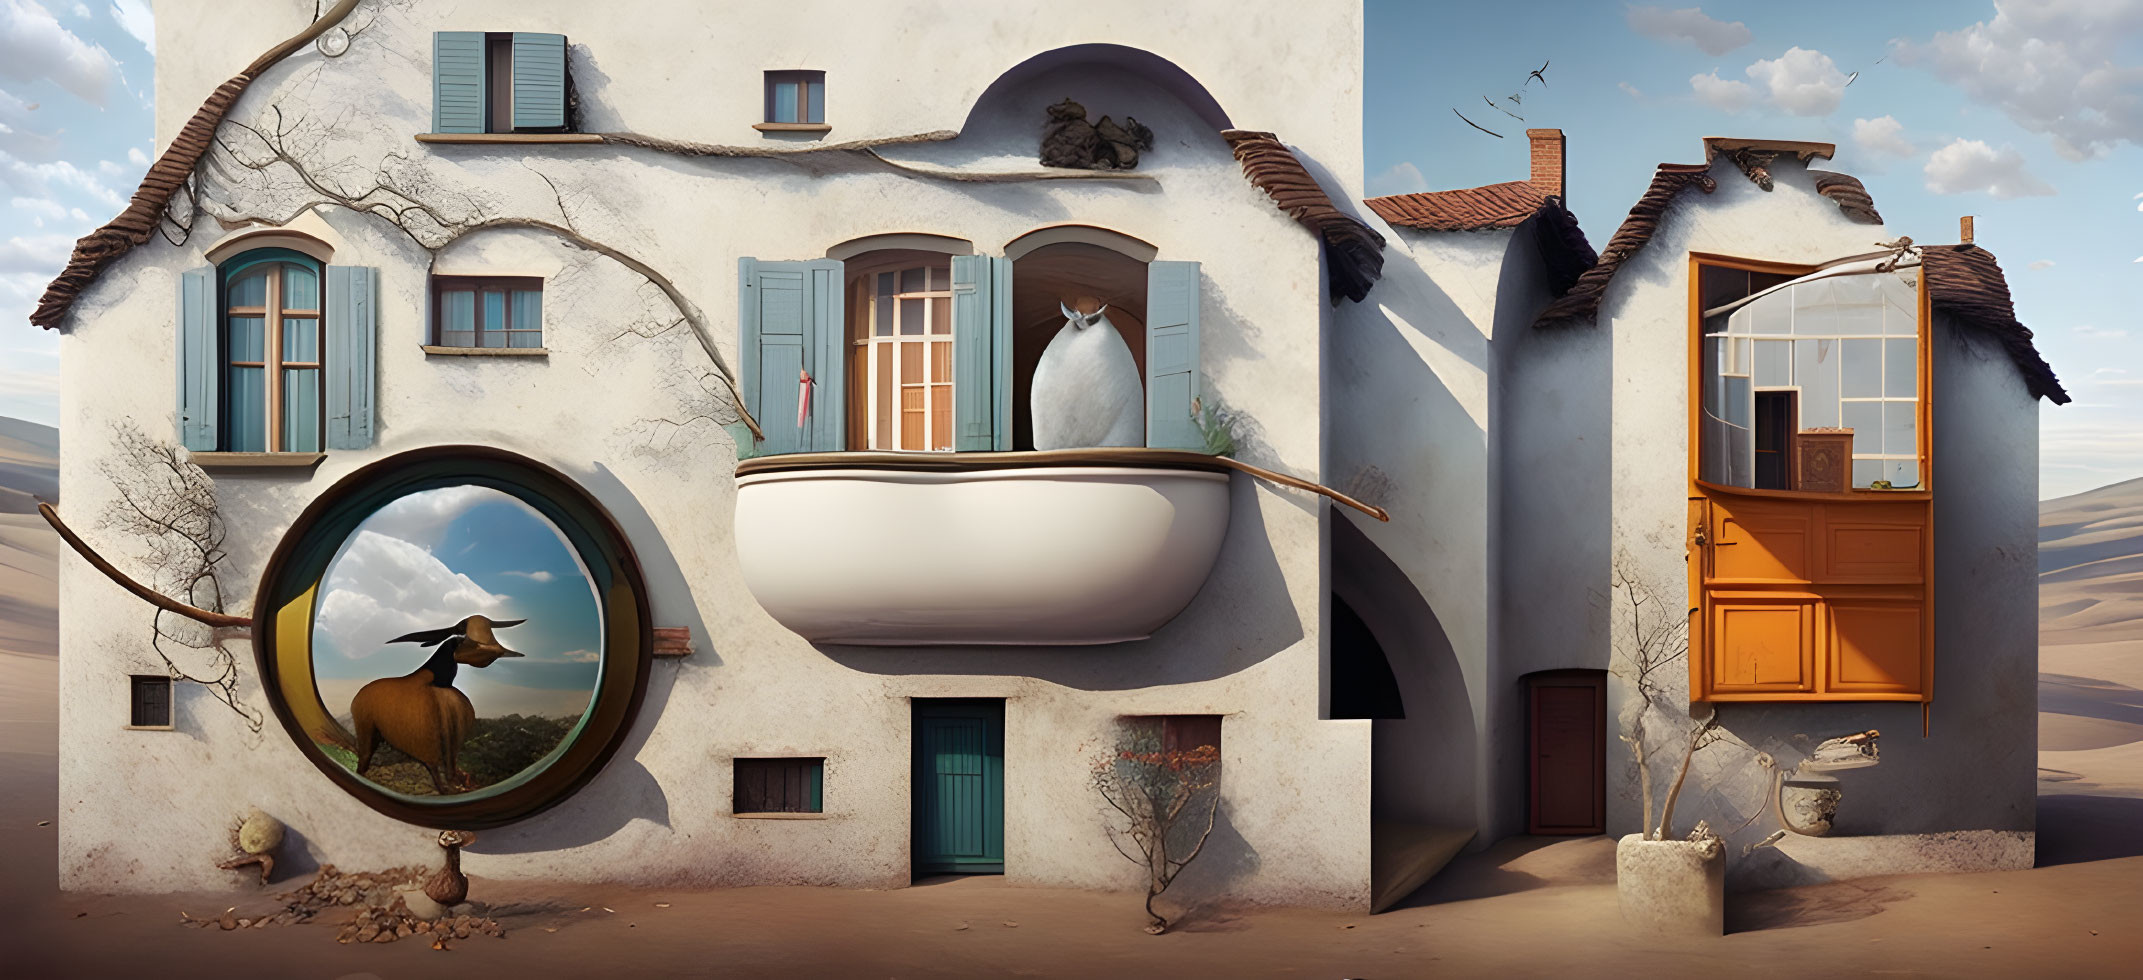 Surreal architectural painting with anthropomorphic features in desert landscape